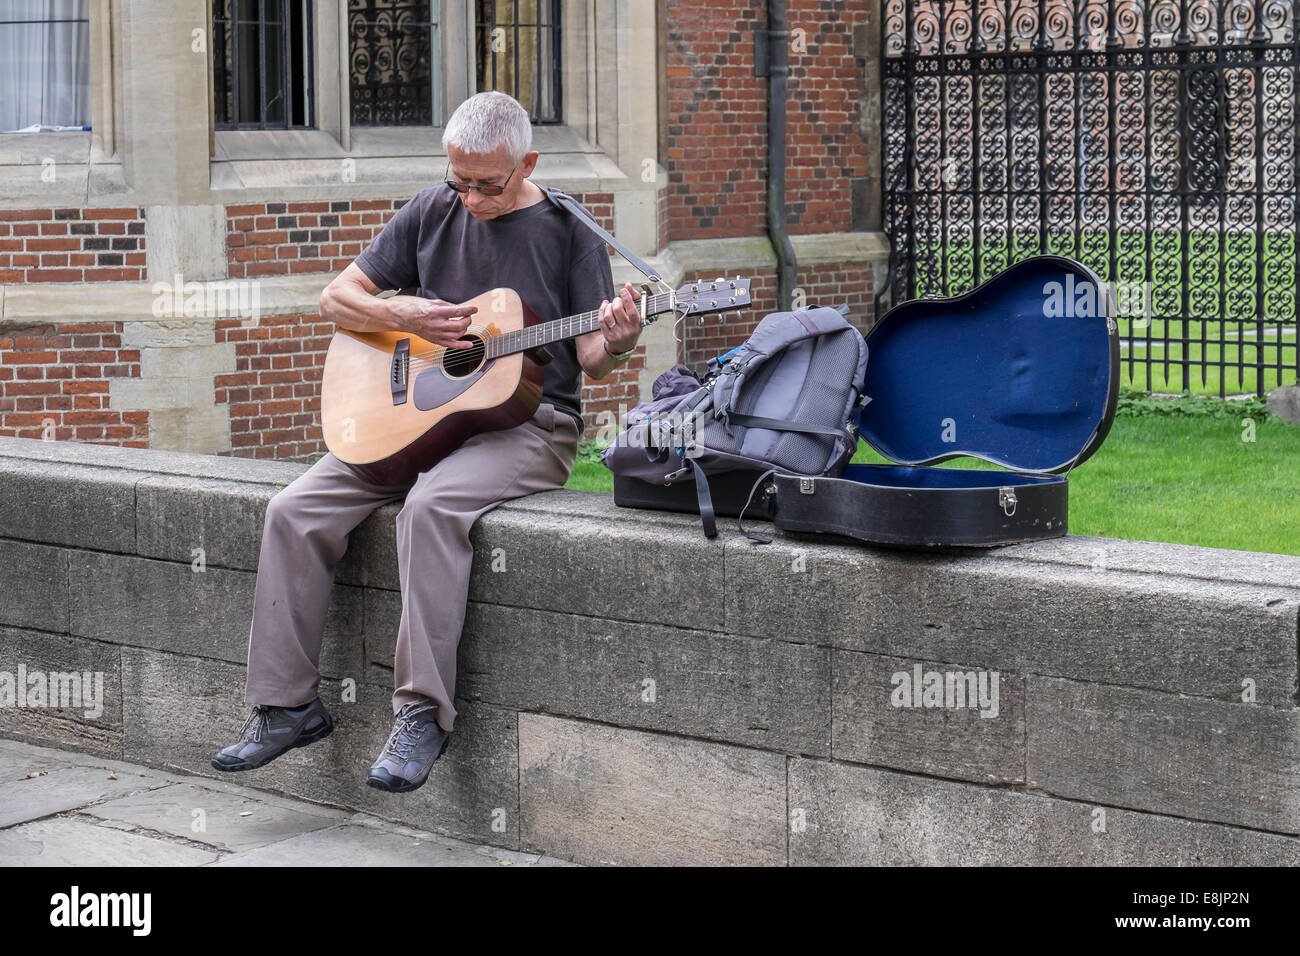 man-busking-on-guitar-sat-on-wall-st-joh